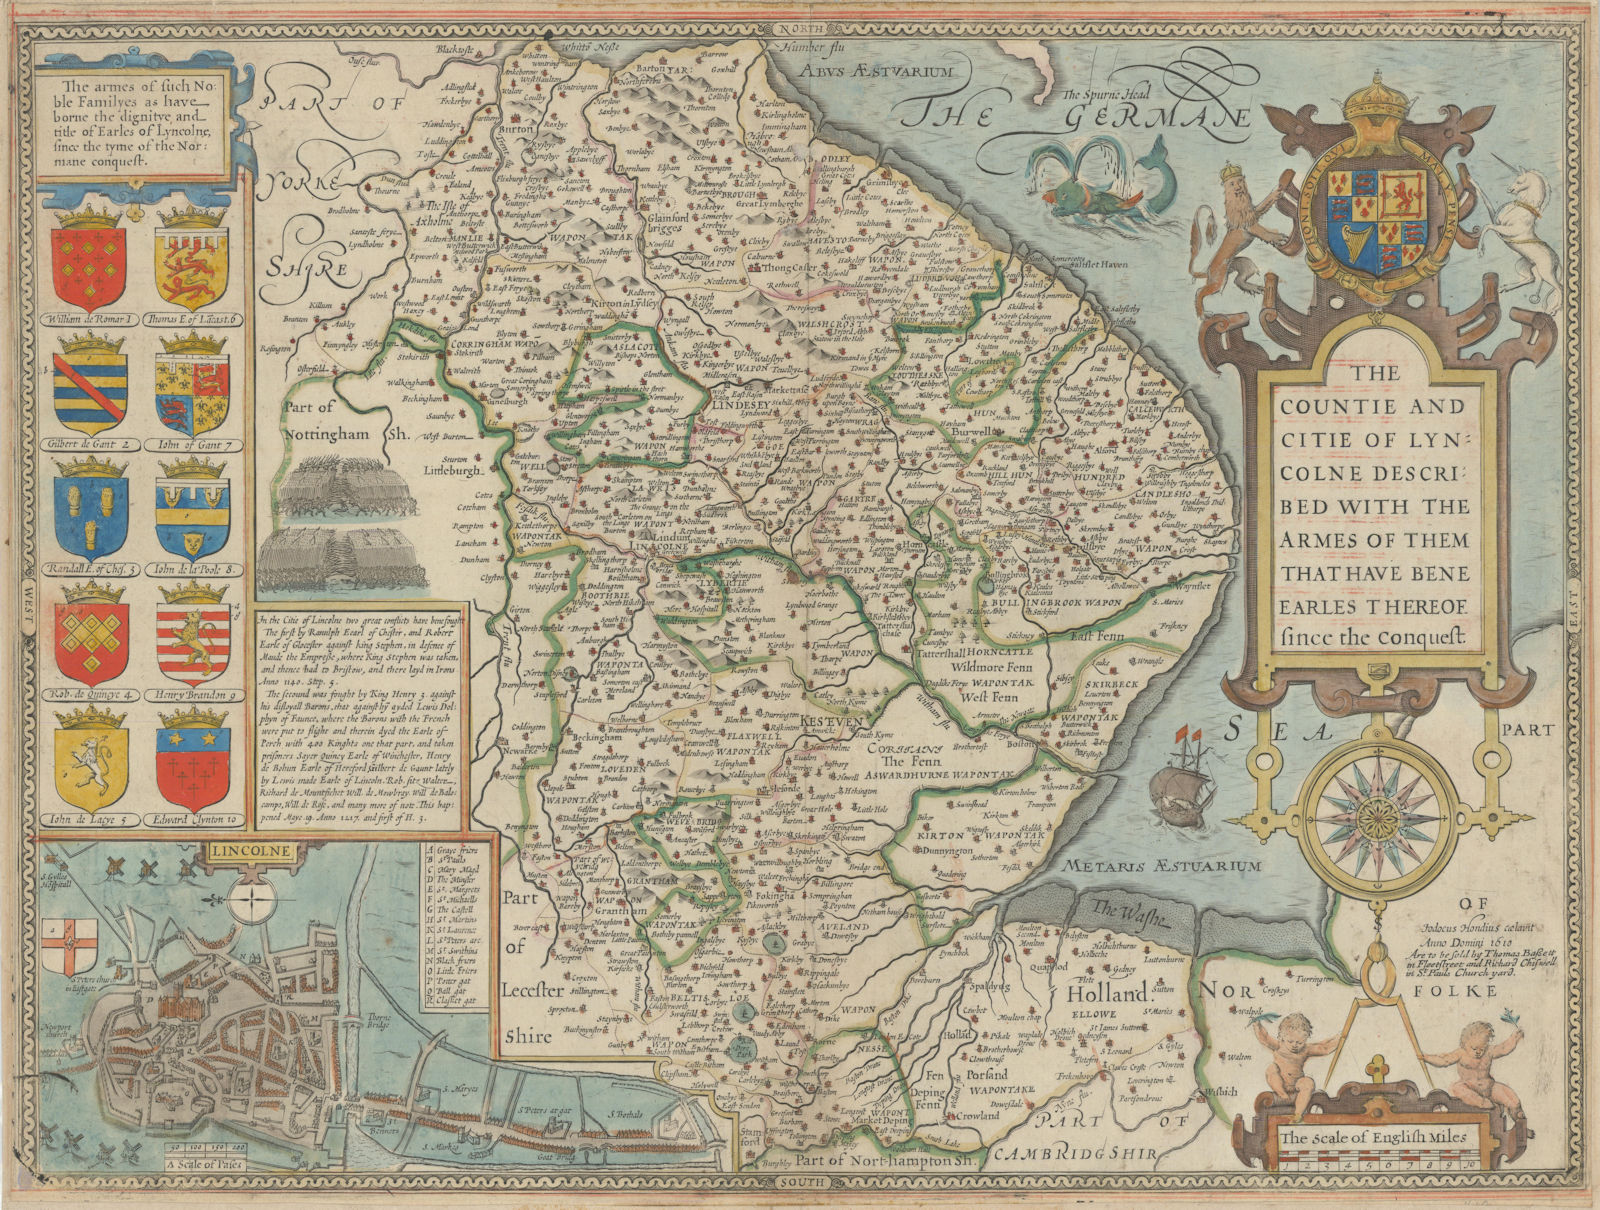 Countie of Lyncolne. Lincolnshire county map by Speed. Bassett/Chiswell ed. 1676